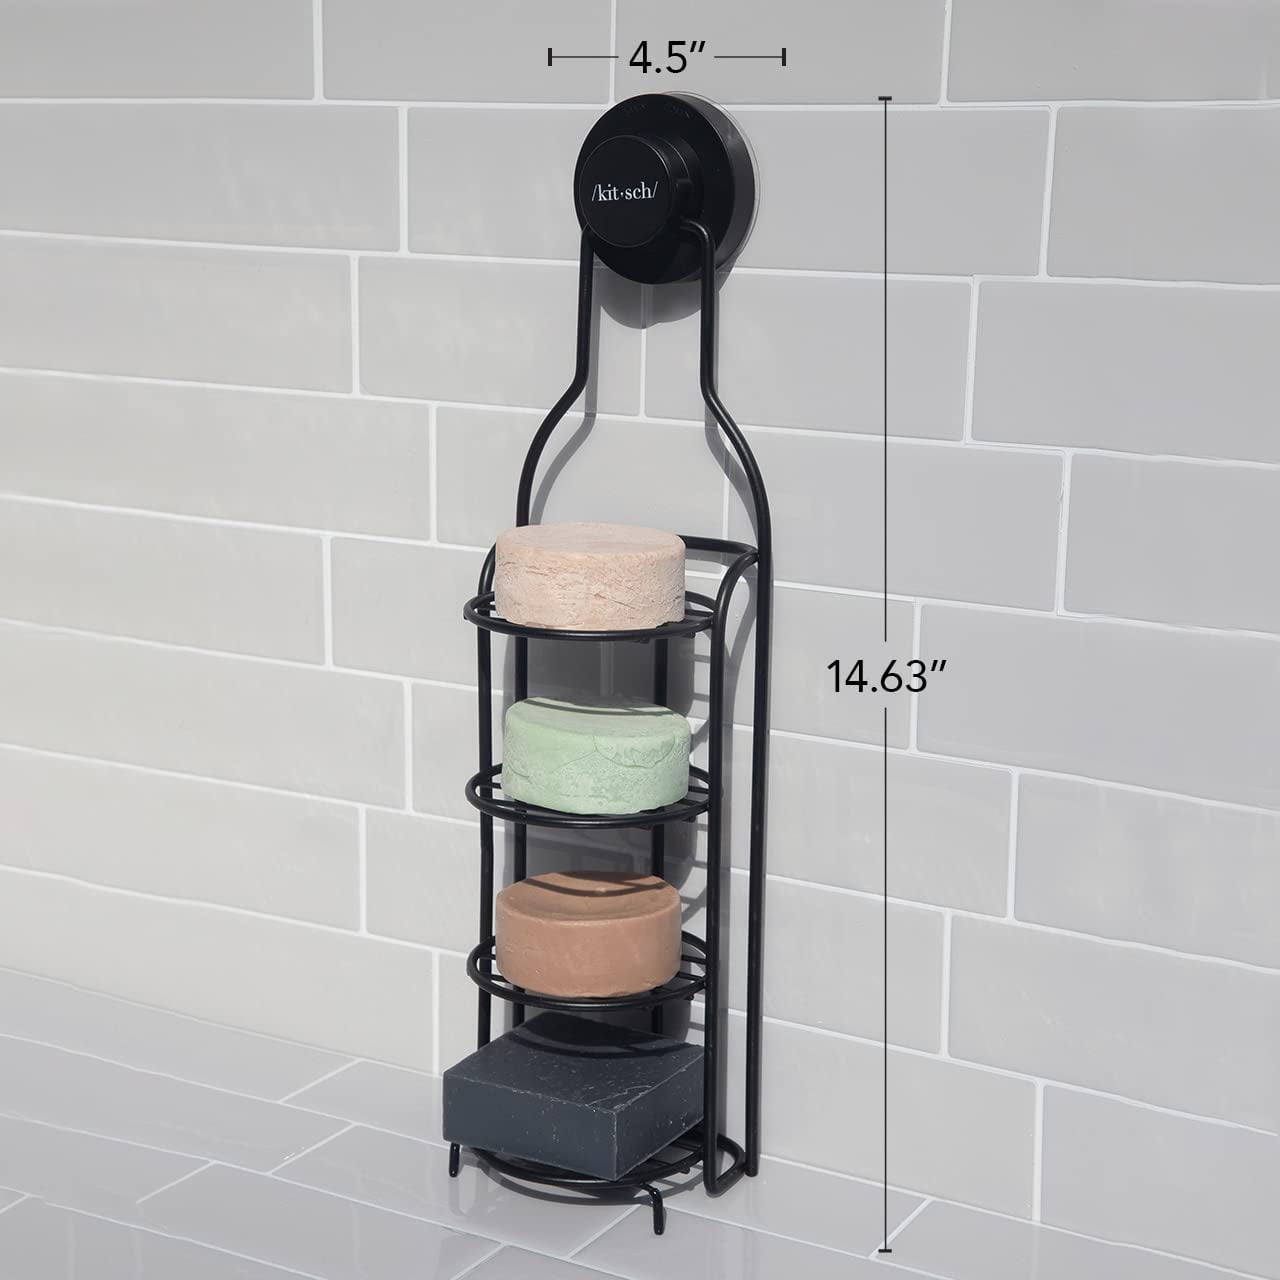 Stainless Steel Self-Draining Shower Caddy Shelf Black - China Shower Caddy  Shelf, Self-Draining Shower Caddy